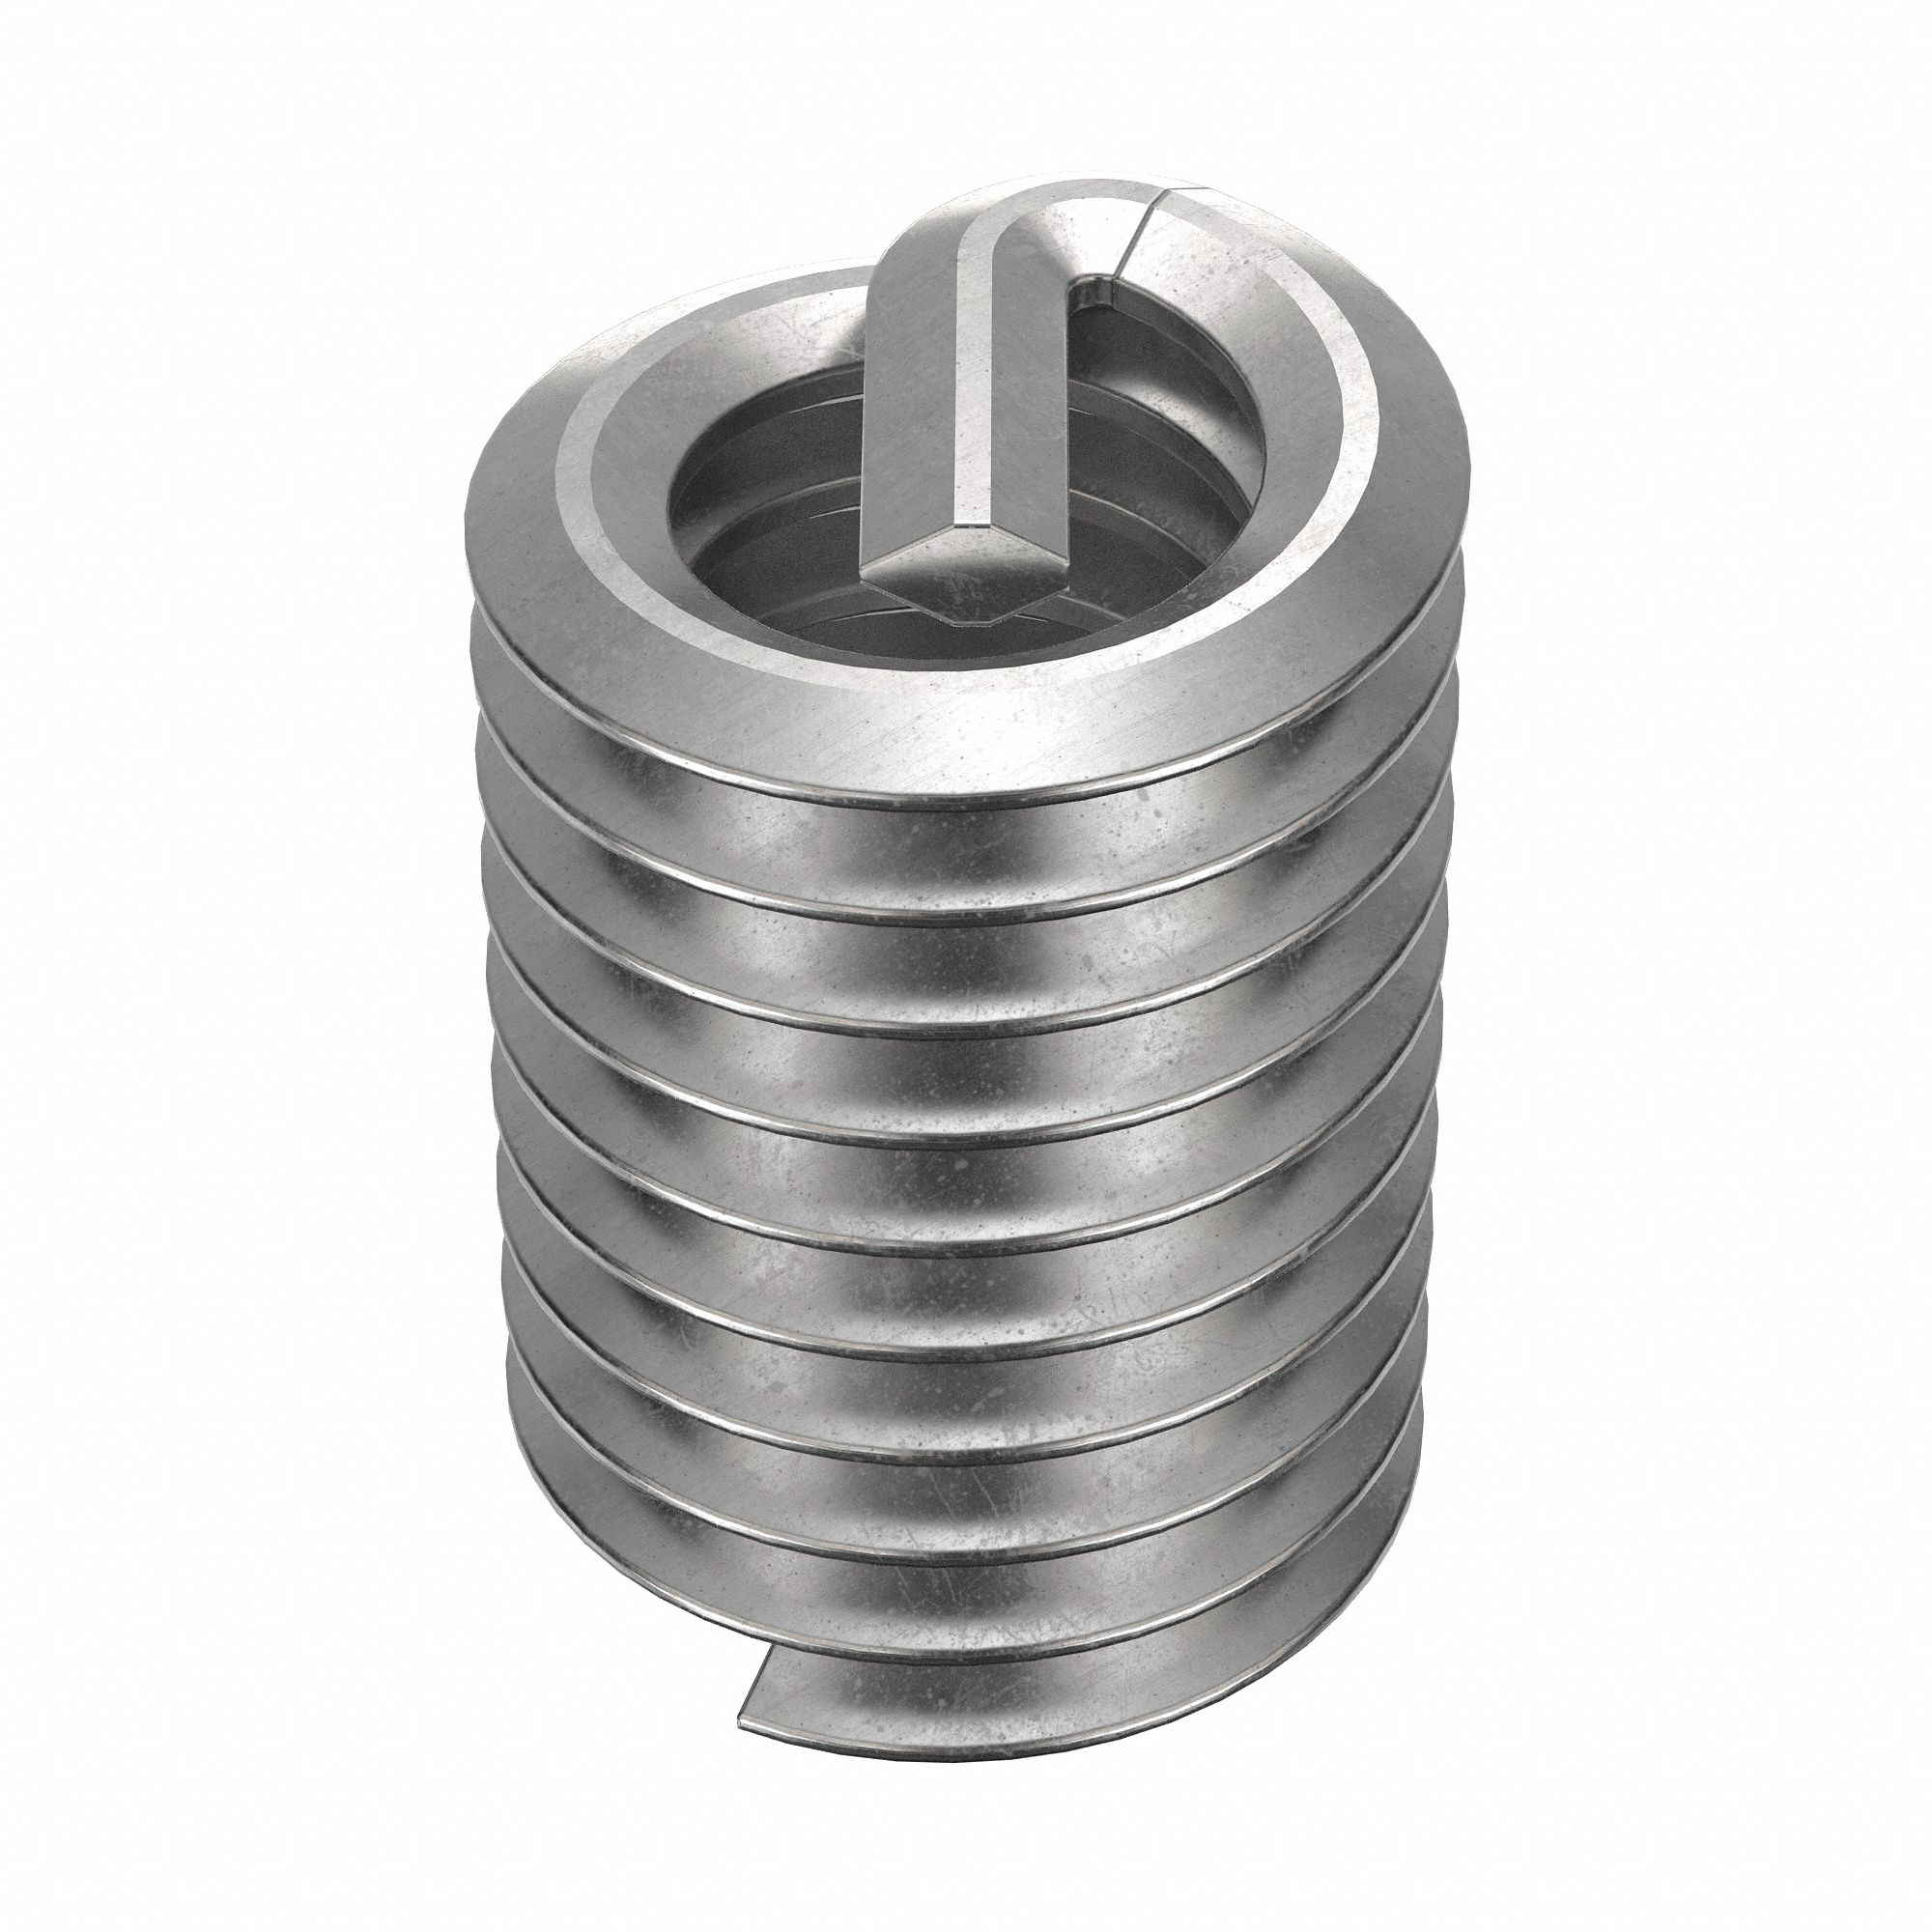 APPROVED VENDOR Helical Insert: Tanged Tang Style, Screw-Locking, #8-32  Thread Size, Plain, 10 PK